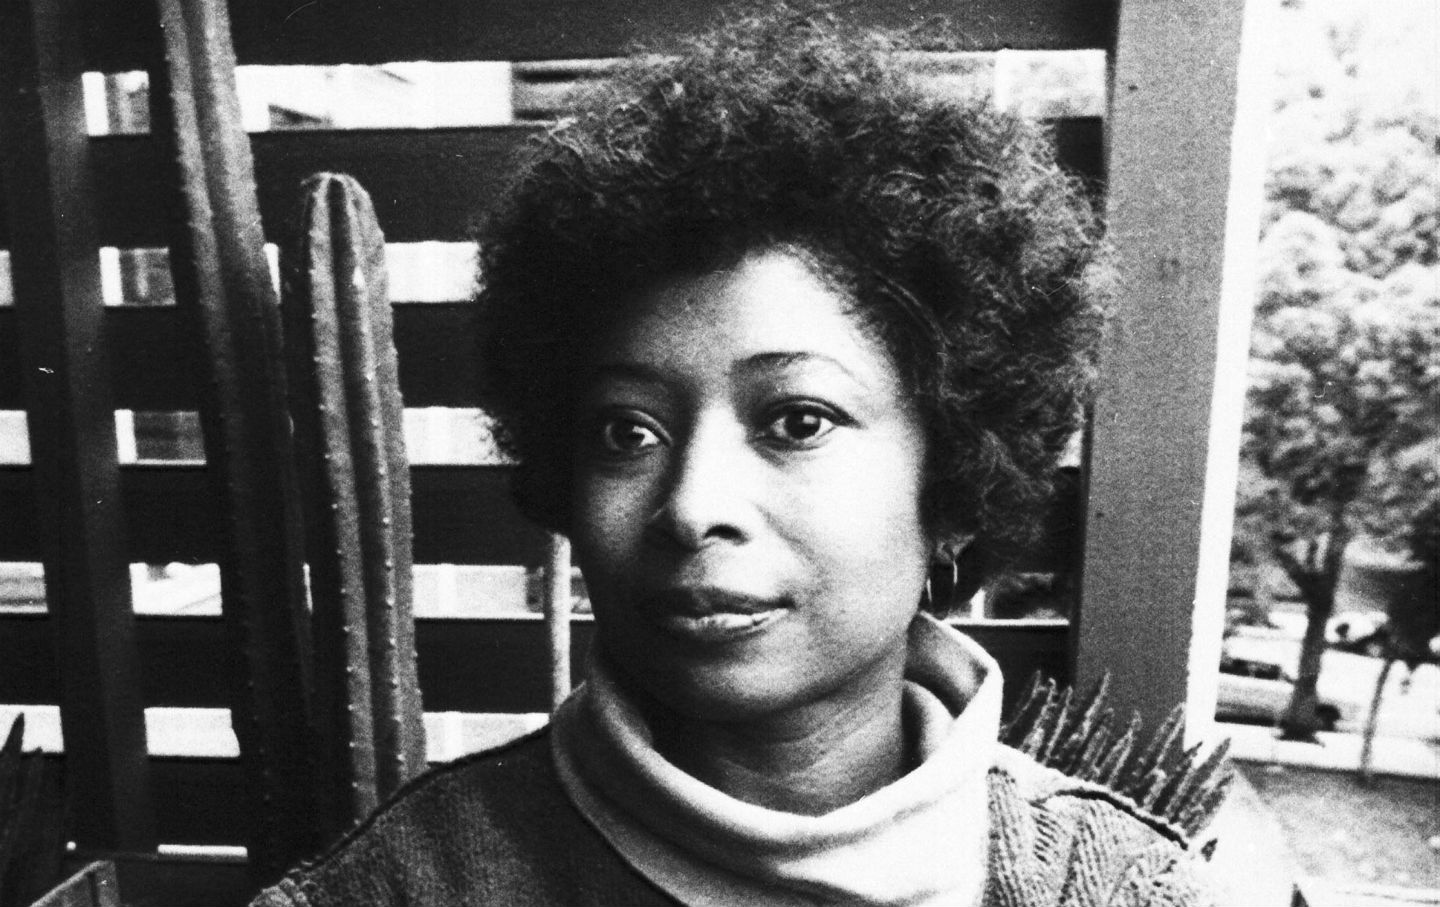 April 18, 1983: Alice Walker Becomes the First Woman of Color to Win the Pulitzer Prize for Fiction